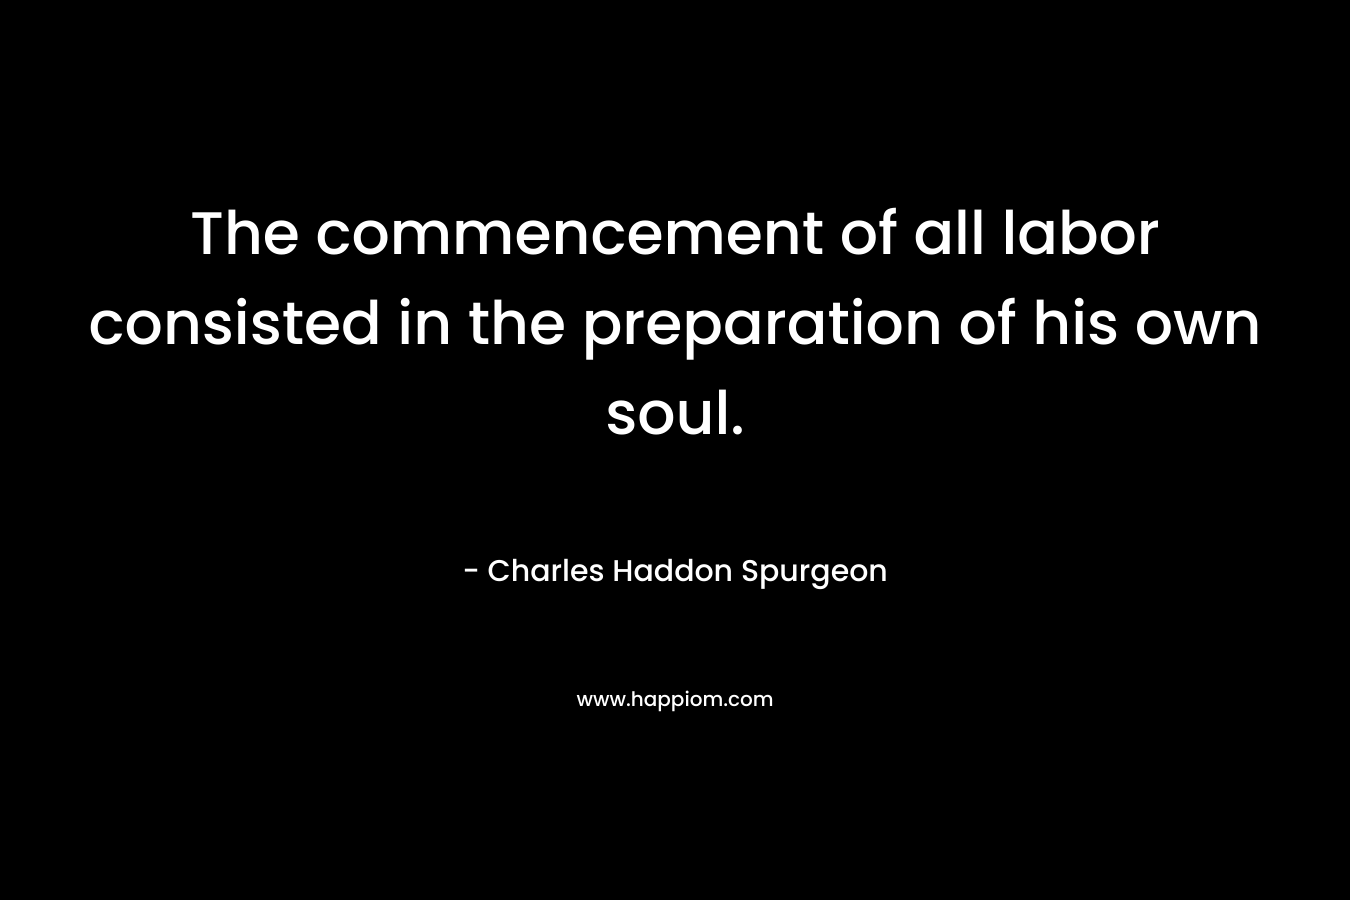 The commencement of all labor consisted in the preparation of his own soul. – Charles Haddon Spurgeon